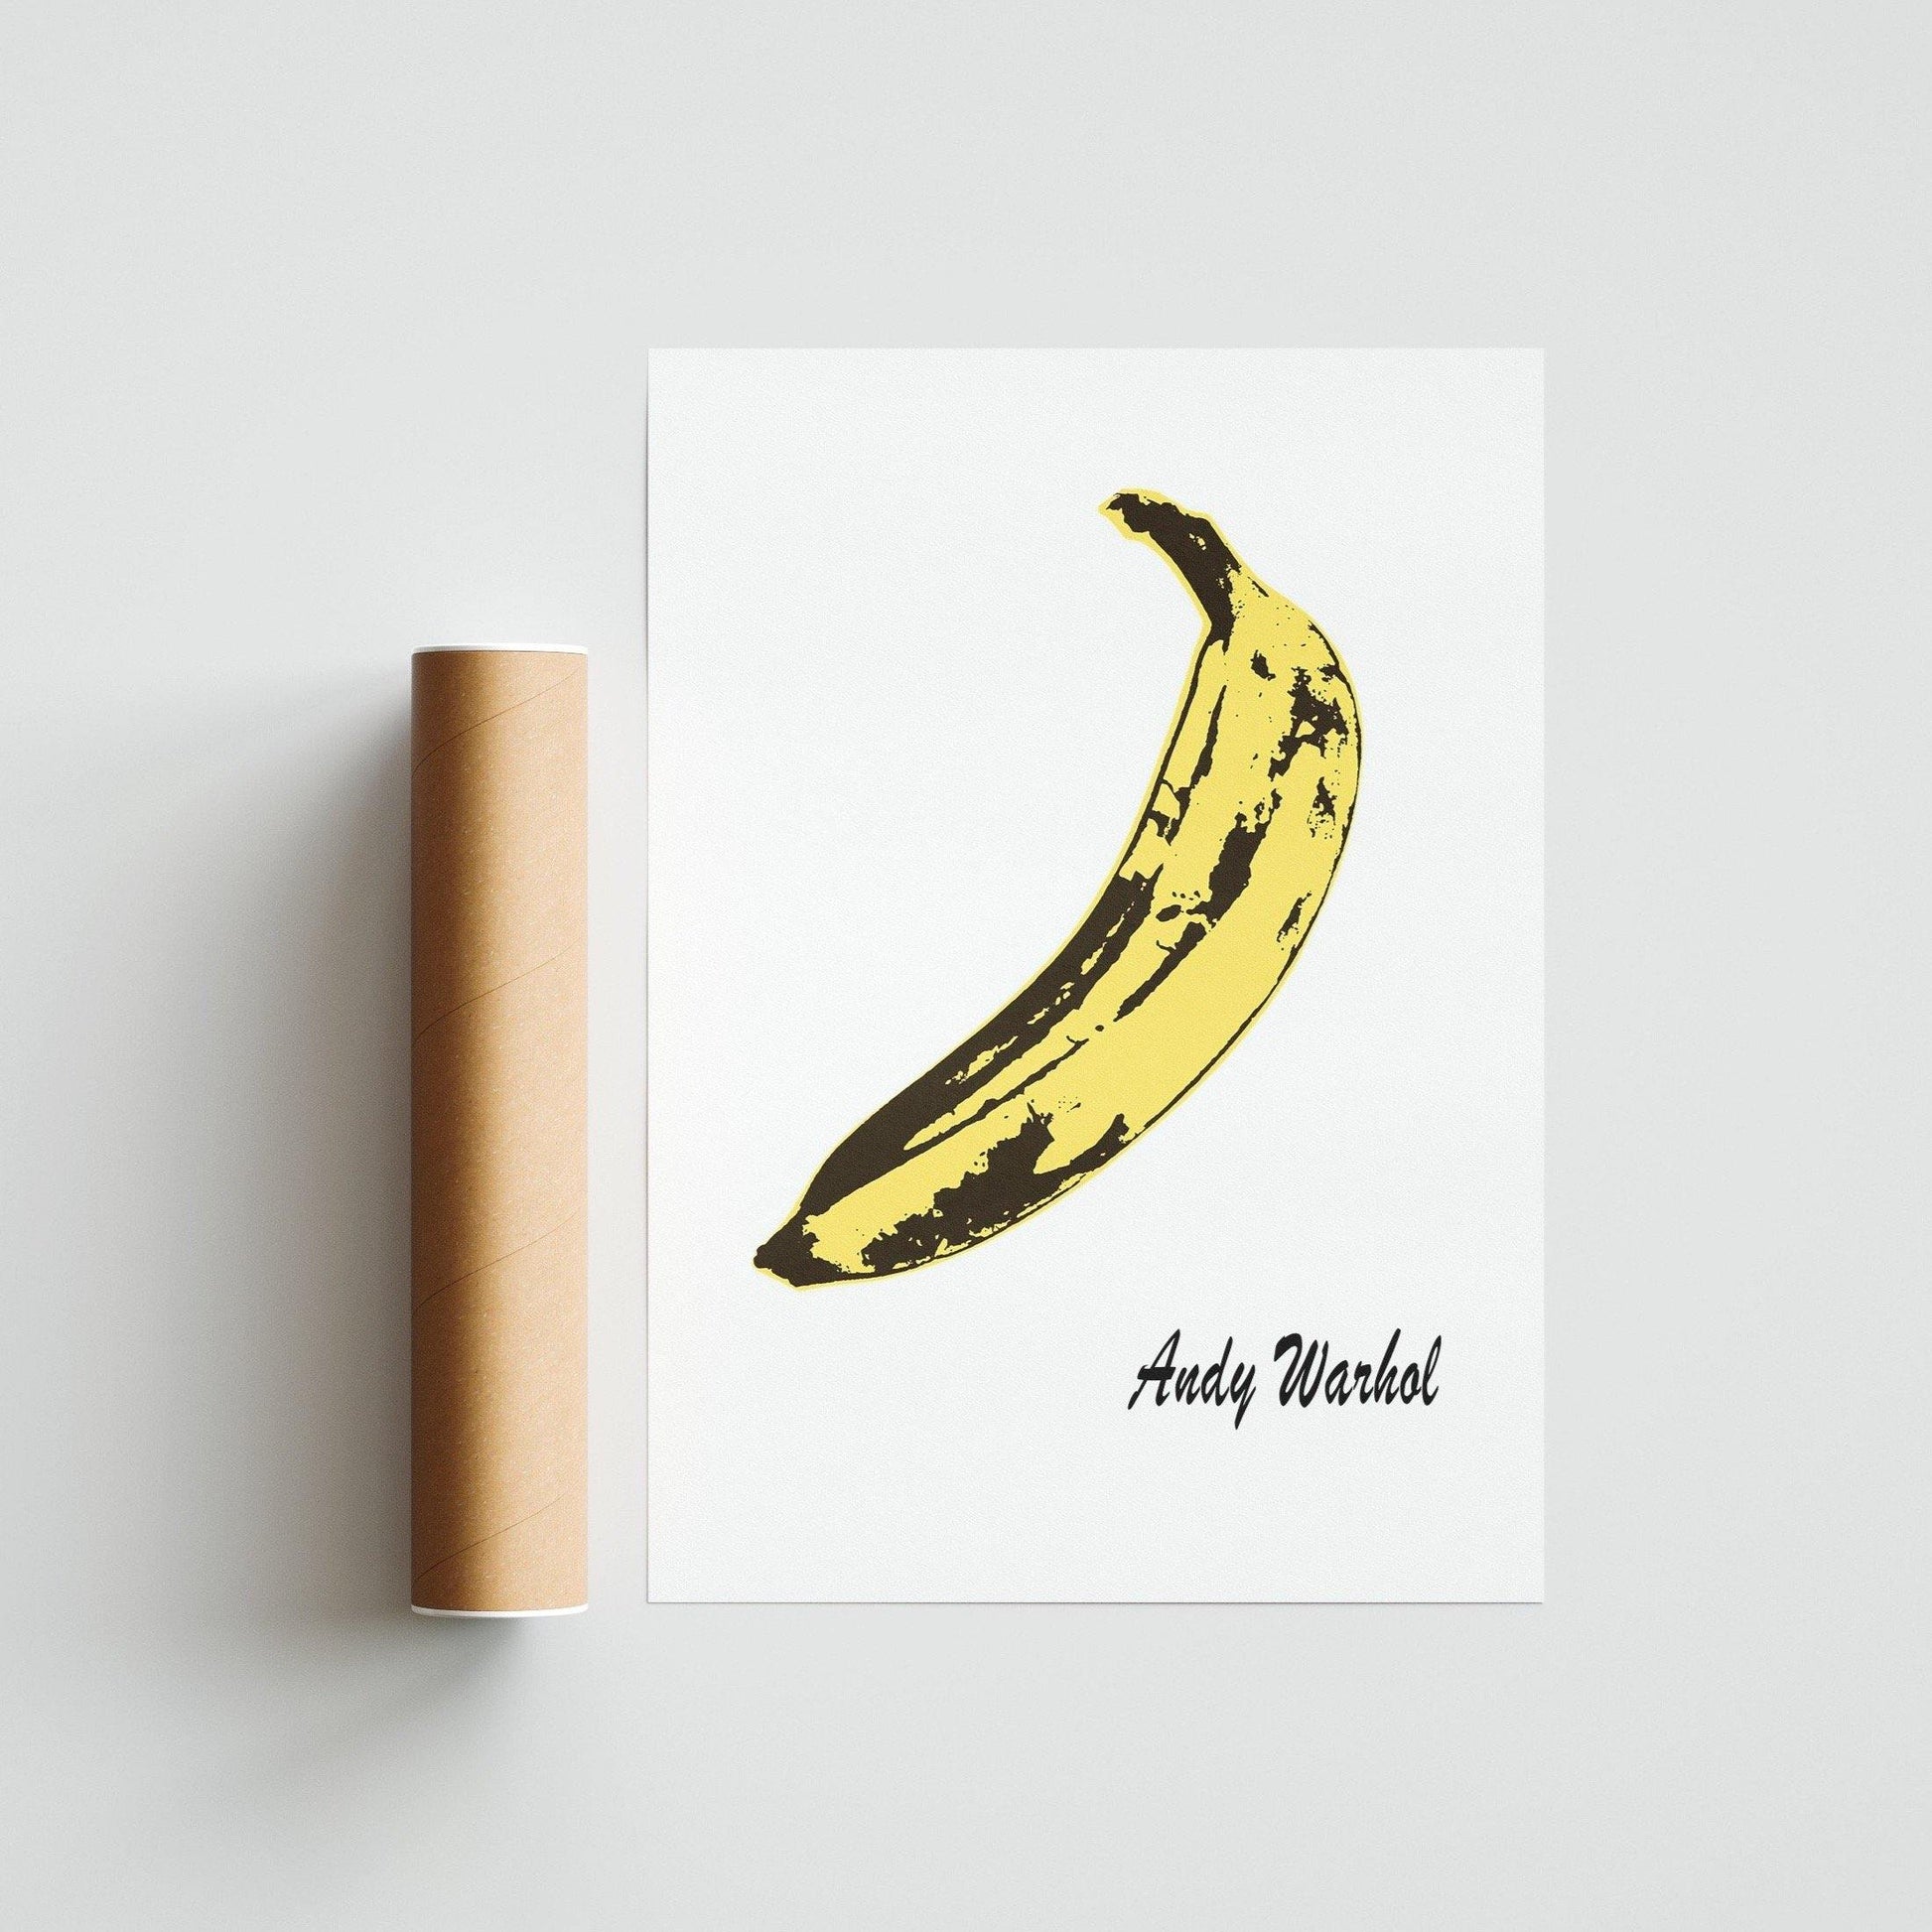 This isn't your average banana print. Inspired by the pop artist Andy Warhol, this playful print is a fun addition to any room. With bright colors and a whimsical design, it's sure to add a touch of personality to your space. Hang it on your wall or place it on a shelf, either way you'll love having this iconic banana print in your home.